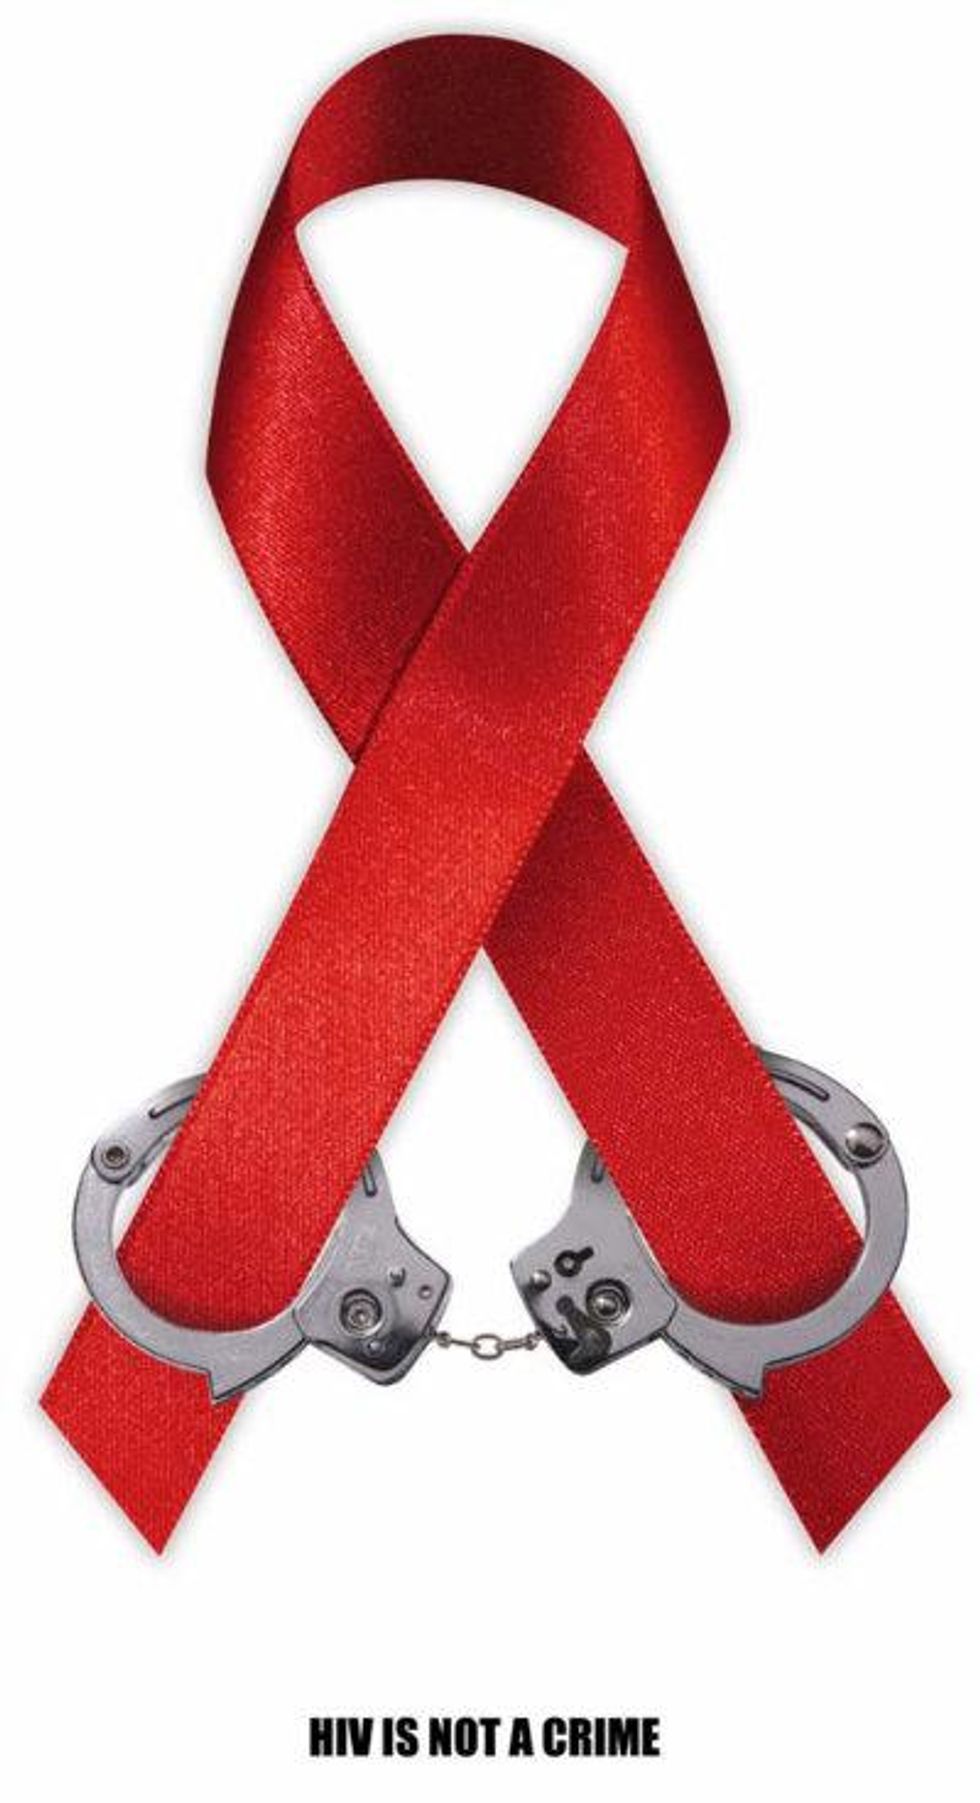 Hiv-is-not-a-crime_0